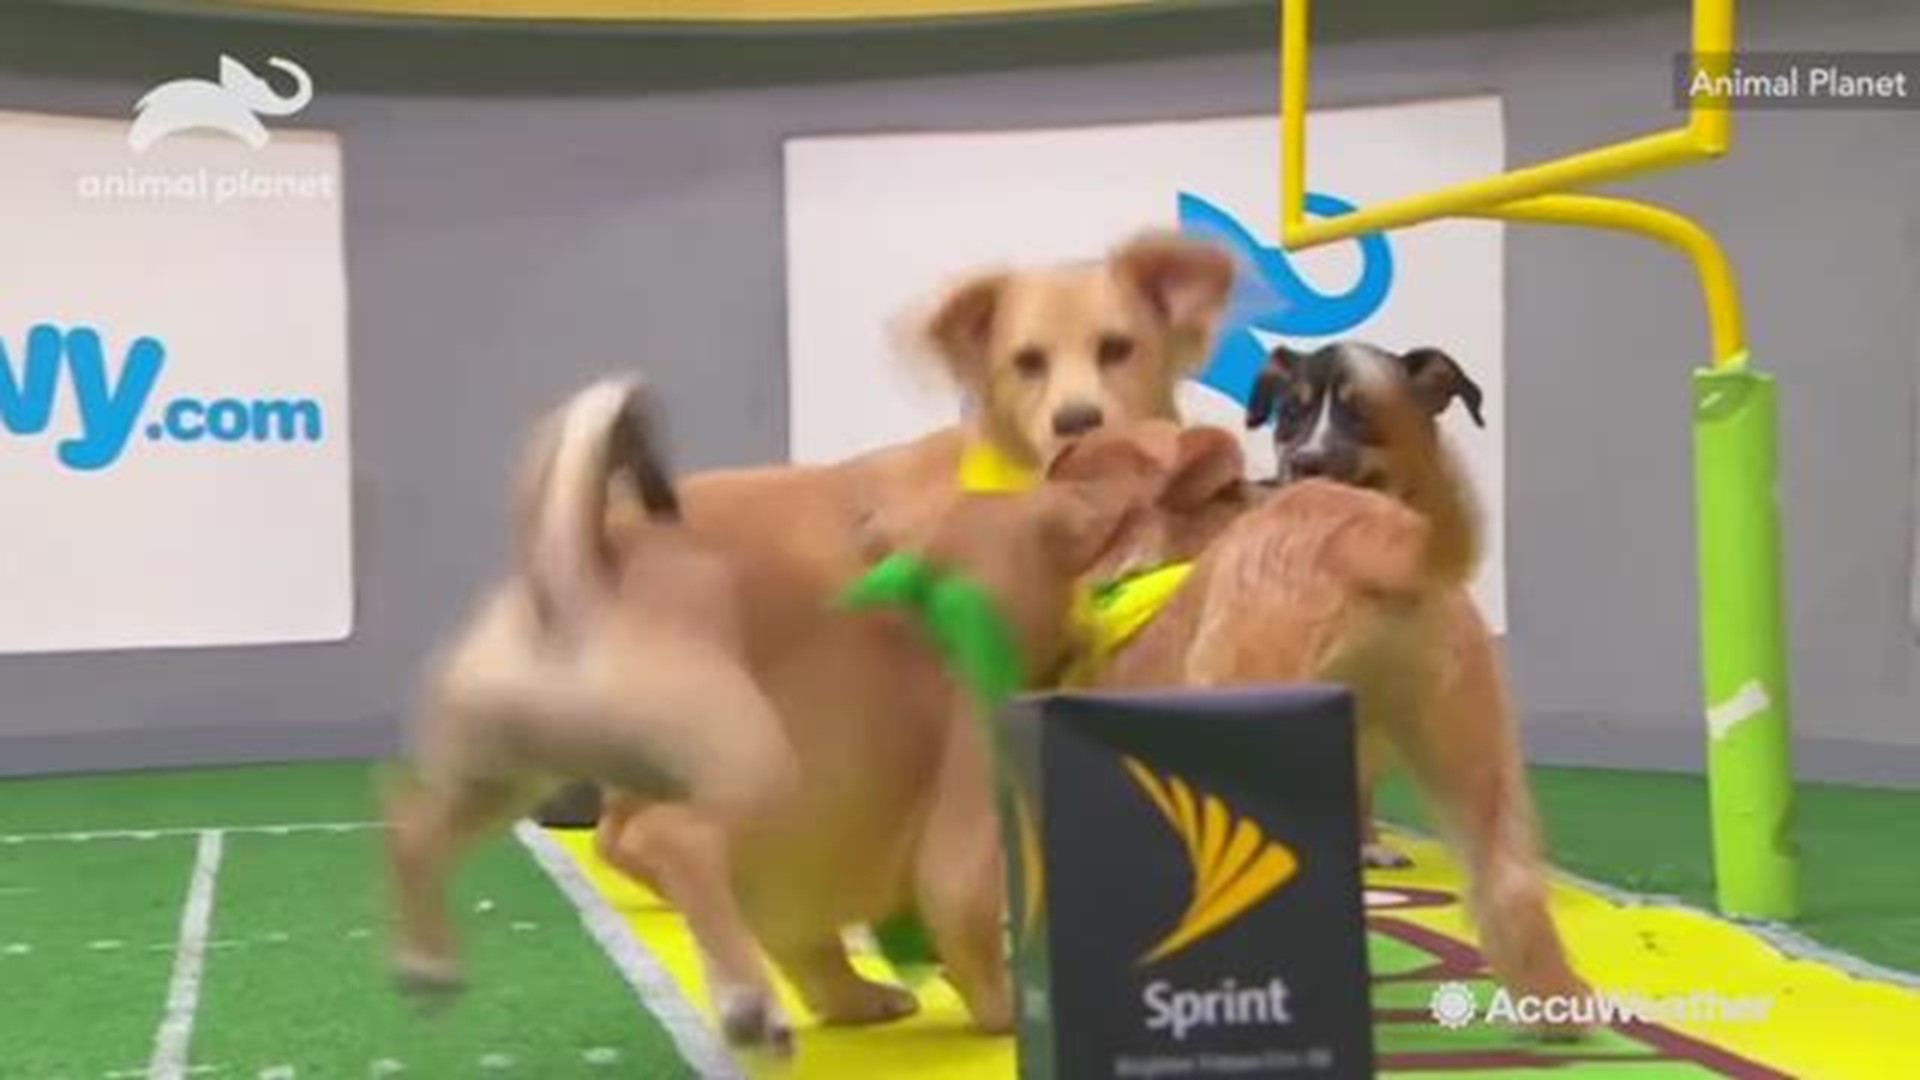 The big game is just around the corner and that means our furry friends are taking to the field for their big game, the Puppy Bowl.